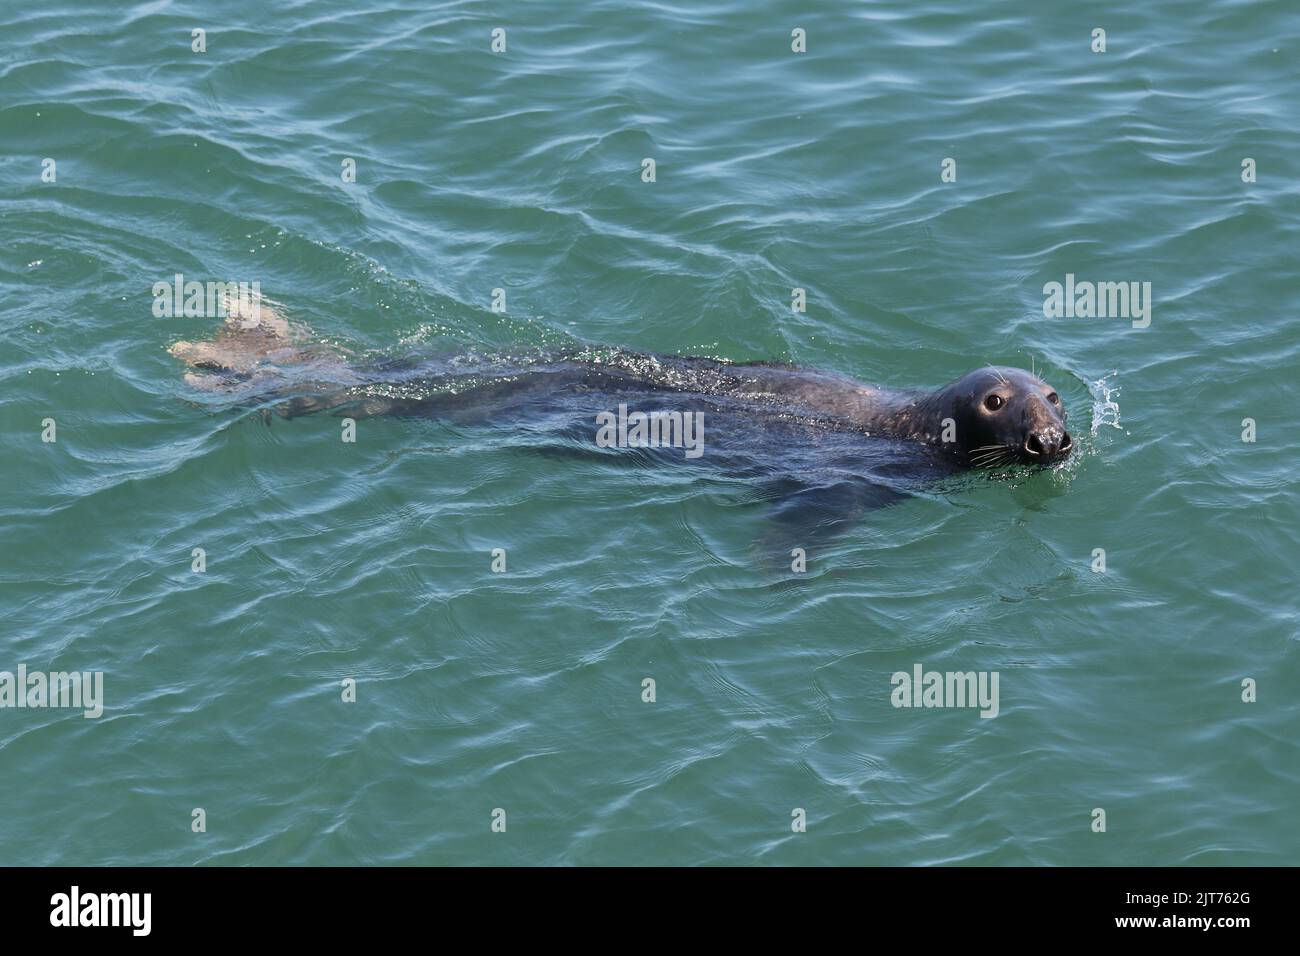 Gray seal swimming in turquoise waters of Chatham Harbor, Cape Cod, MA.  Viewed from the Fishing Pier Observation Deck. Stock Photo